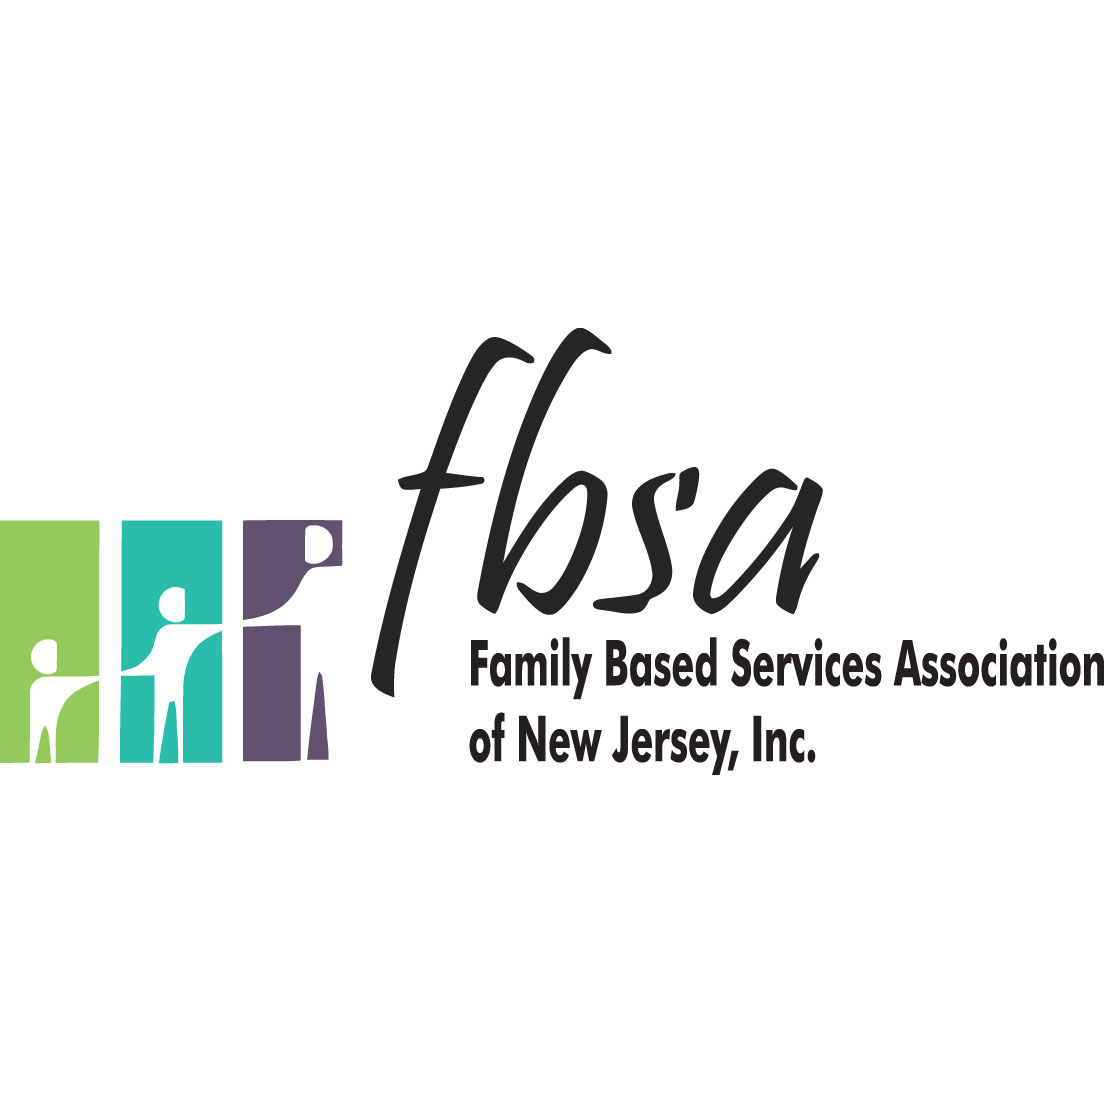 Family Based Services Association of New Jersey logo